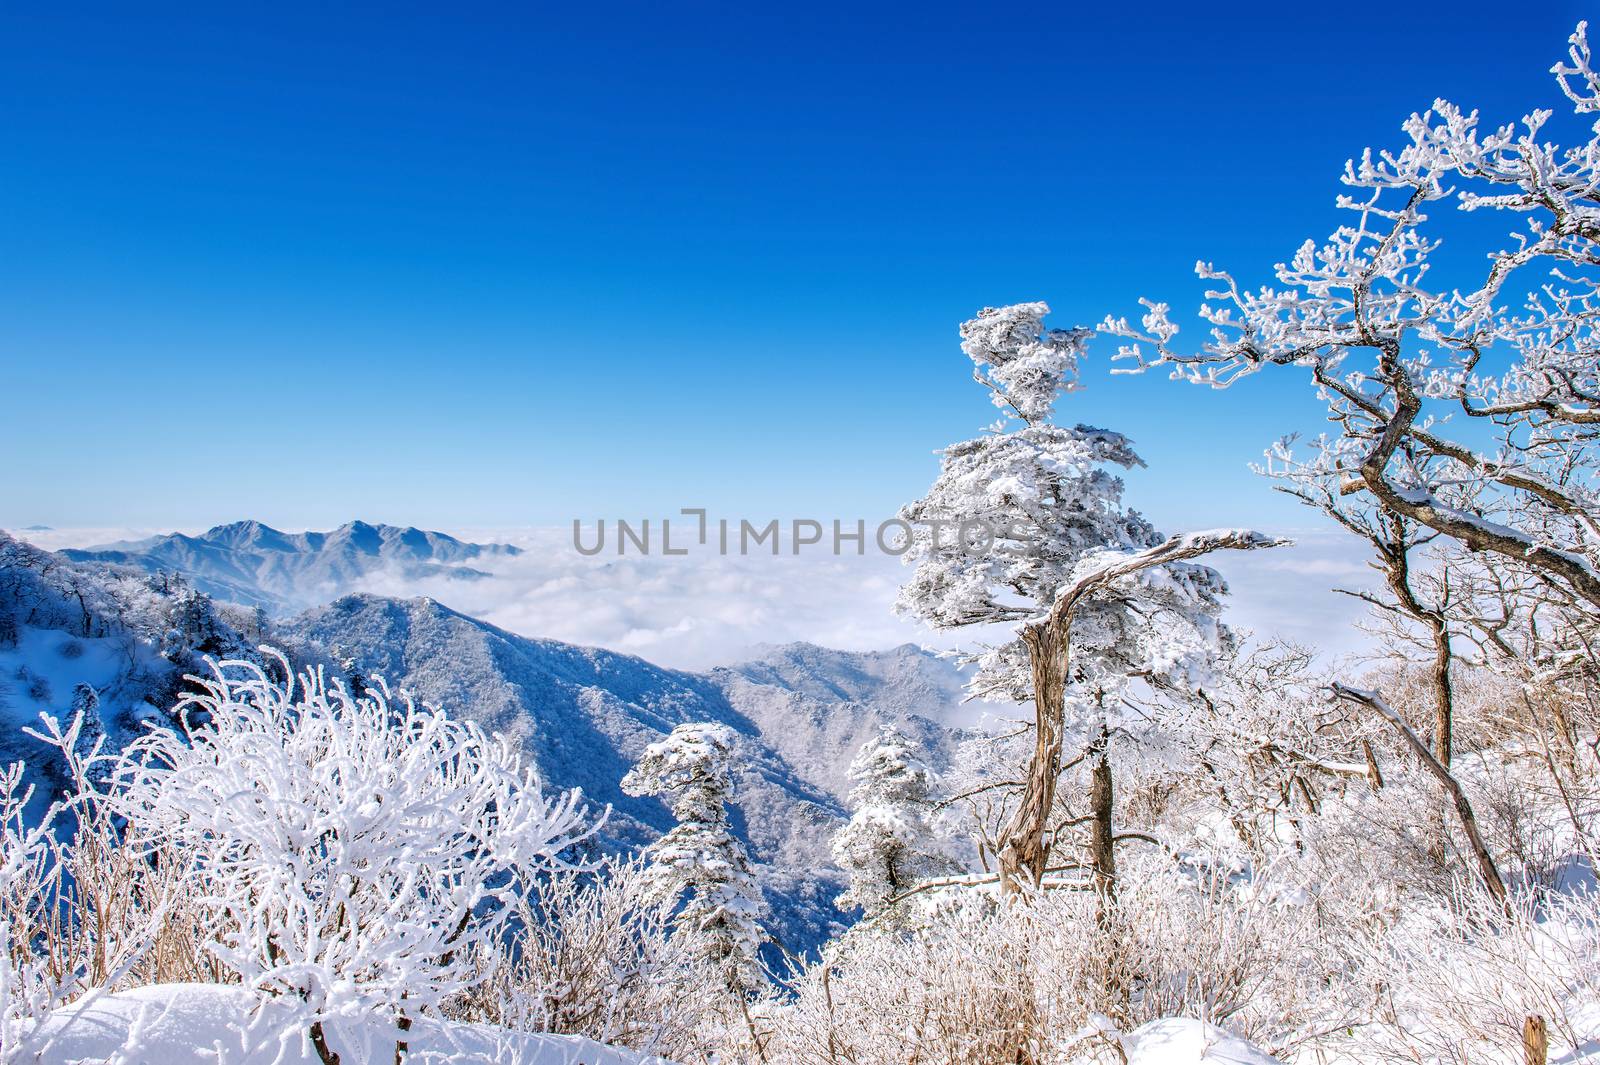 Seoraksan mountains is covered by morning fog in winter, Korea.